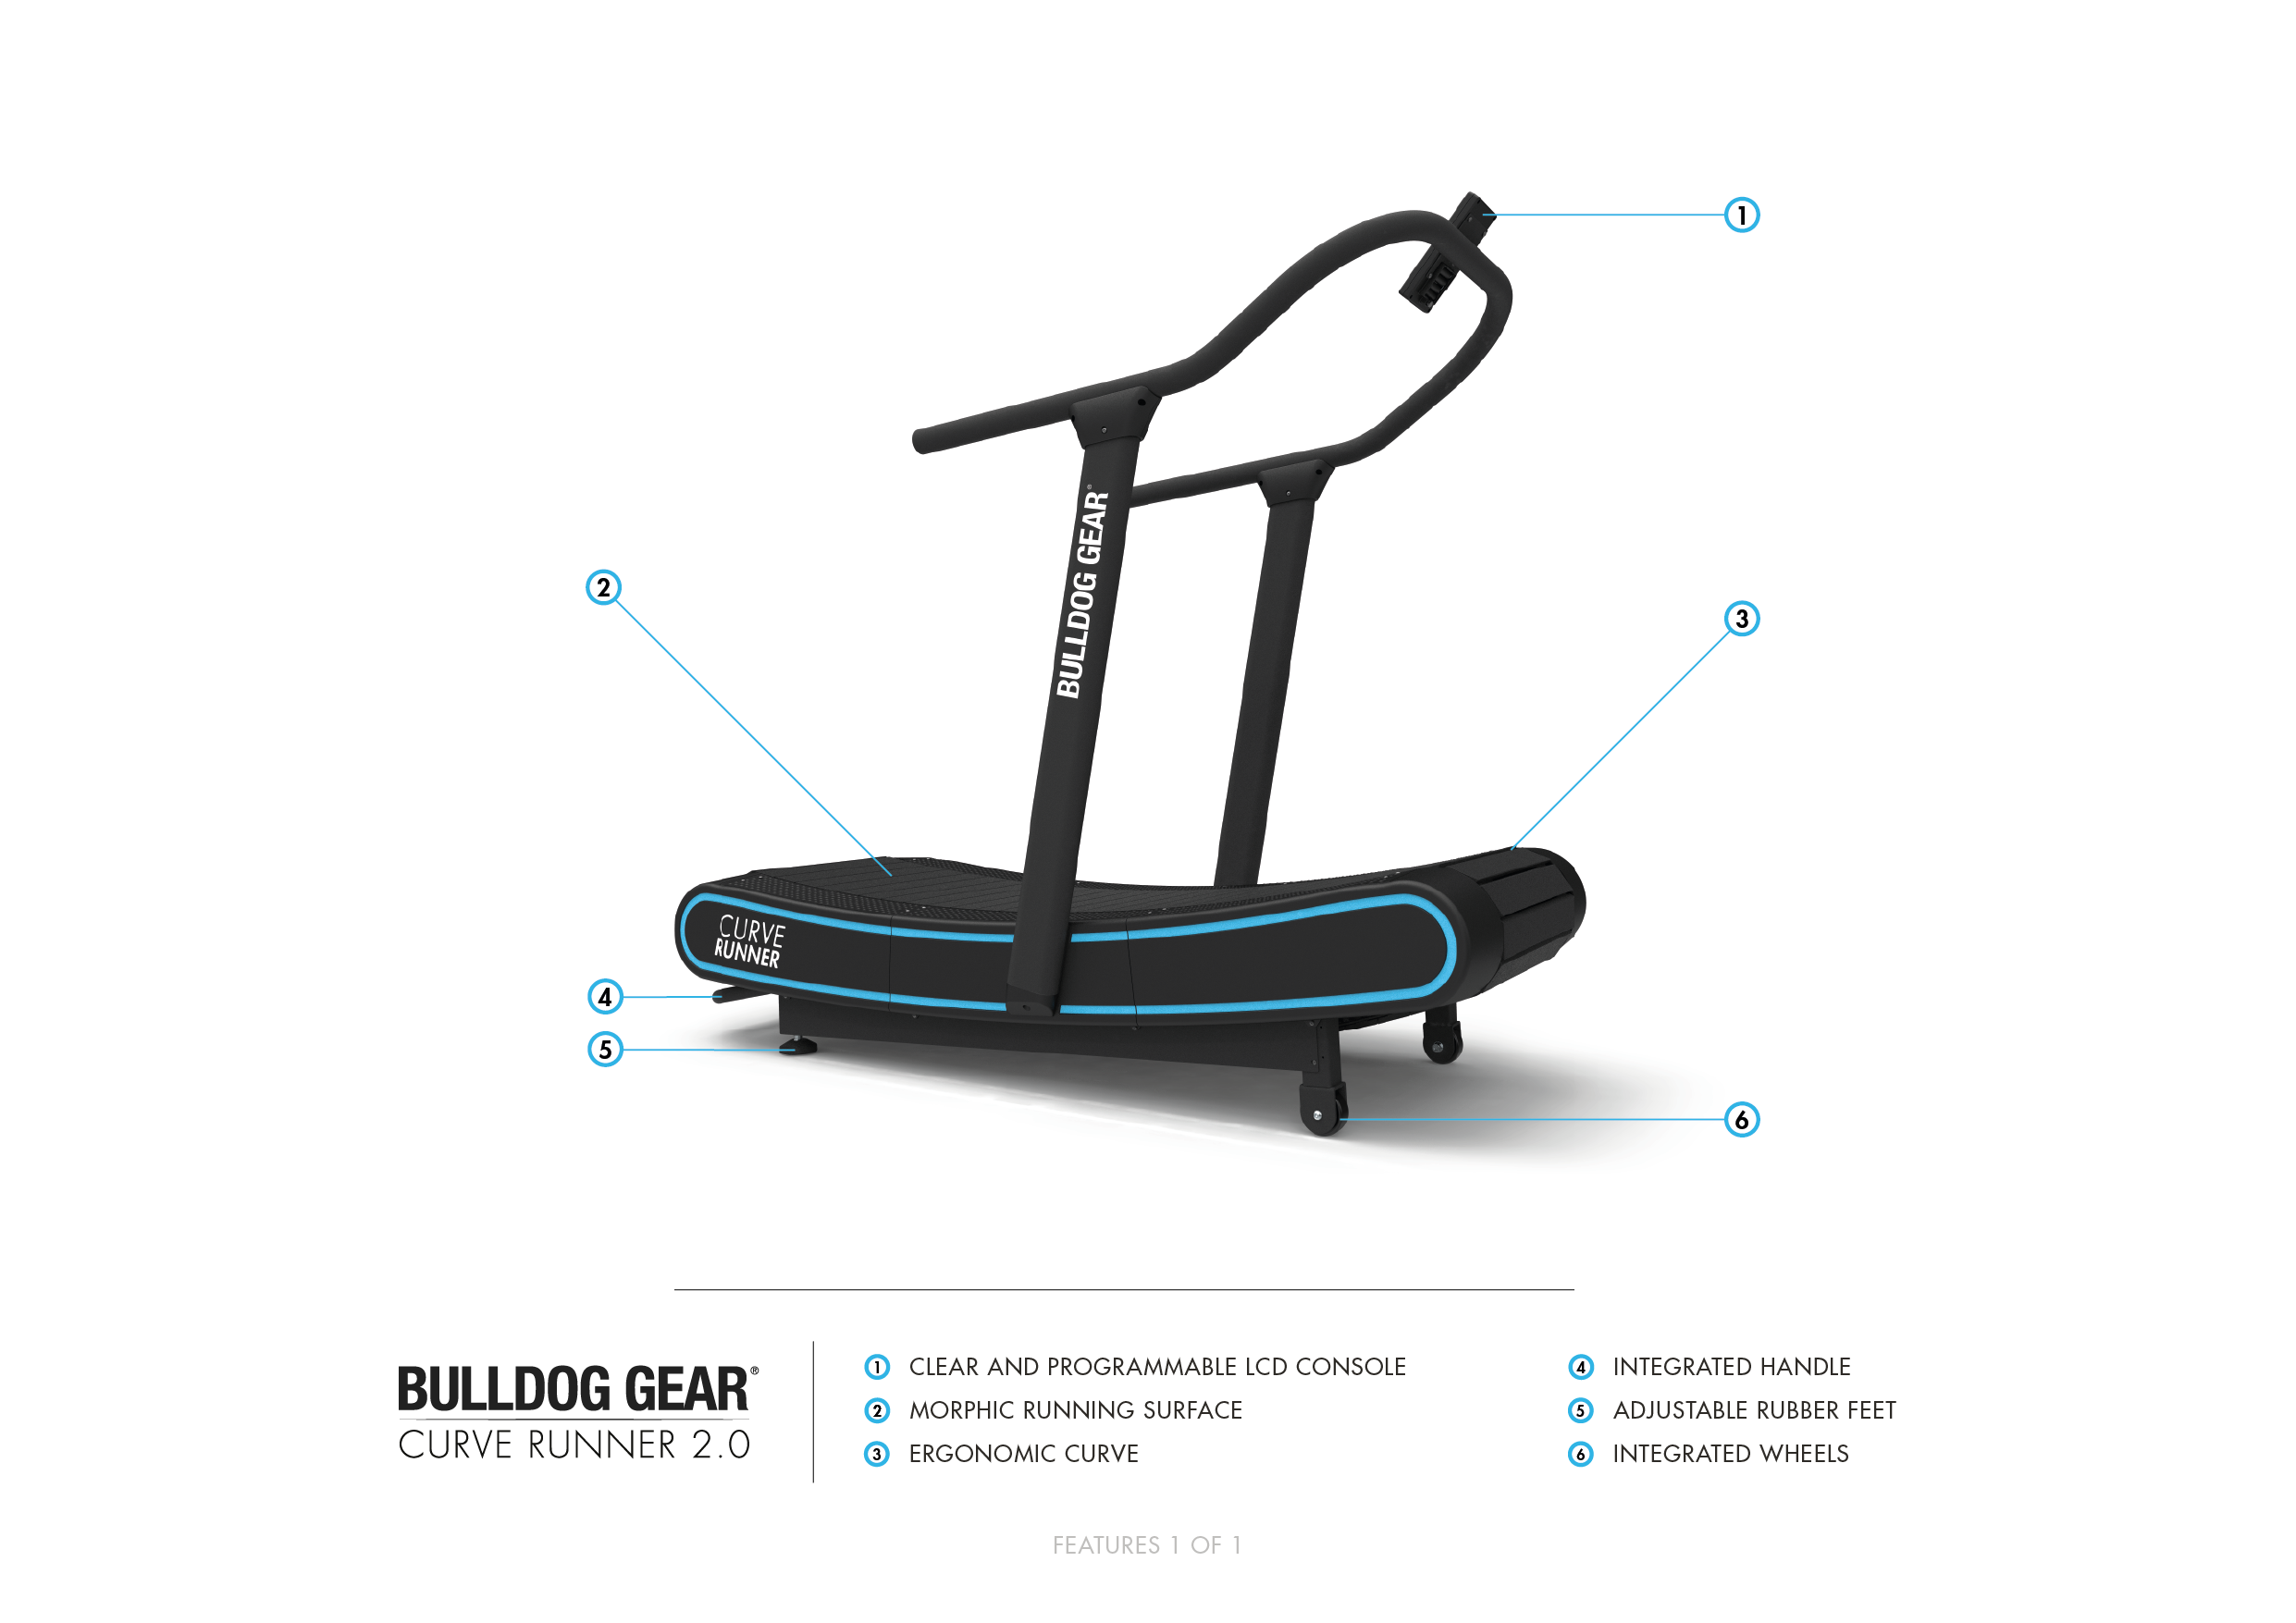 Bulldog Gear - Curve Runner 2.0 product features